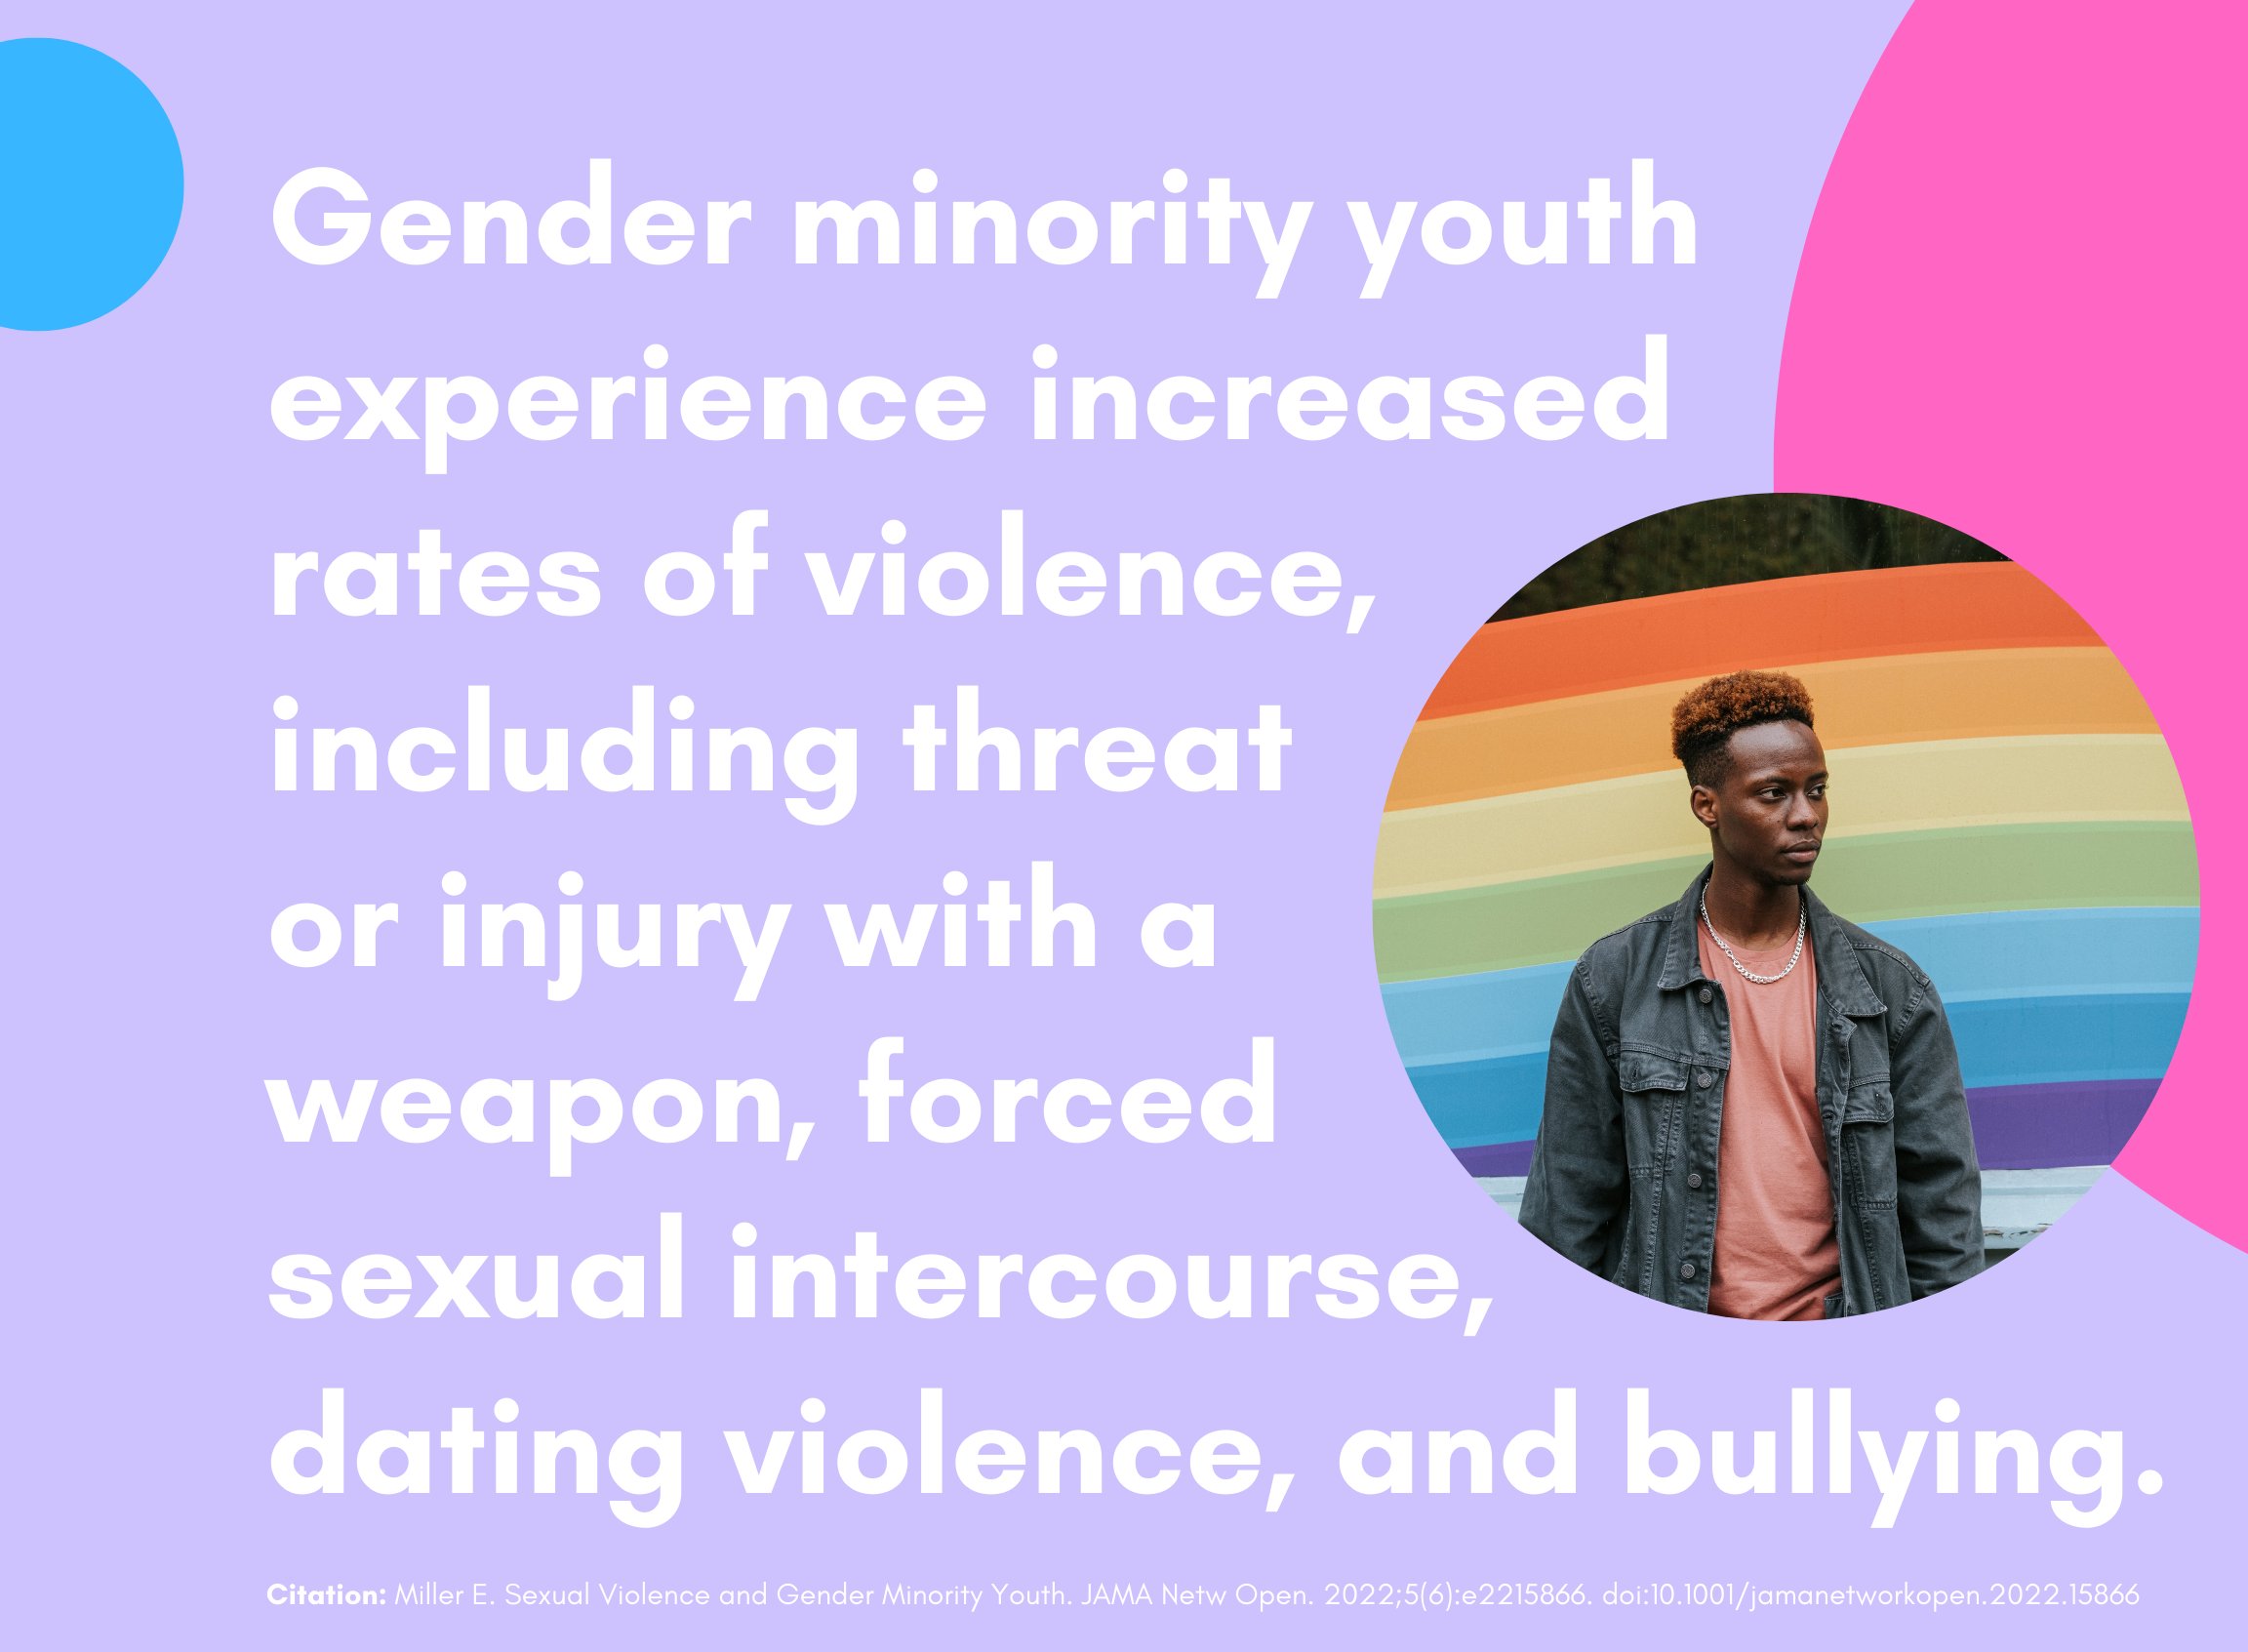 Gender minority youth experience increased rates of violence, including threat or injury with a weapon, forced sexual intercourse, dating violence, and bullying. 